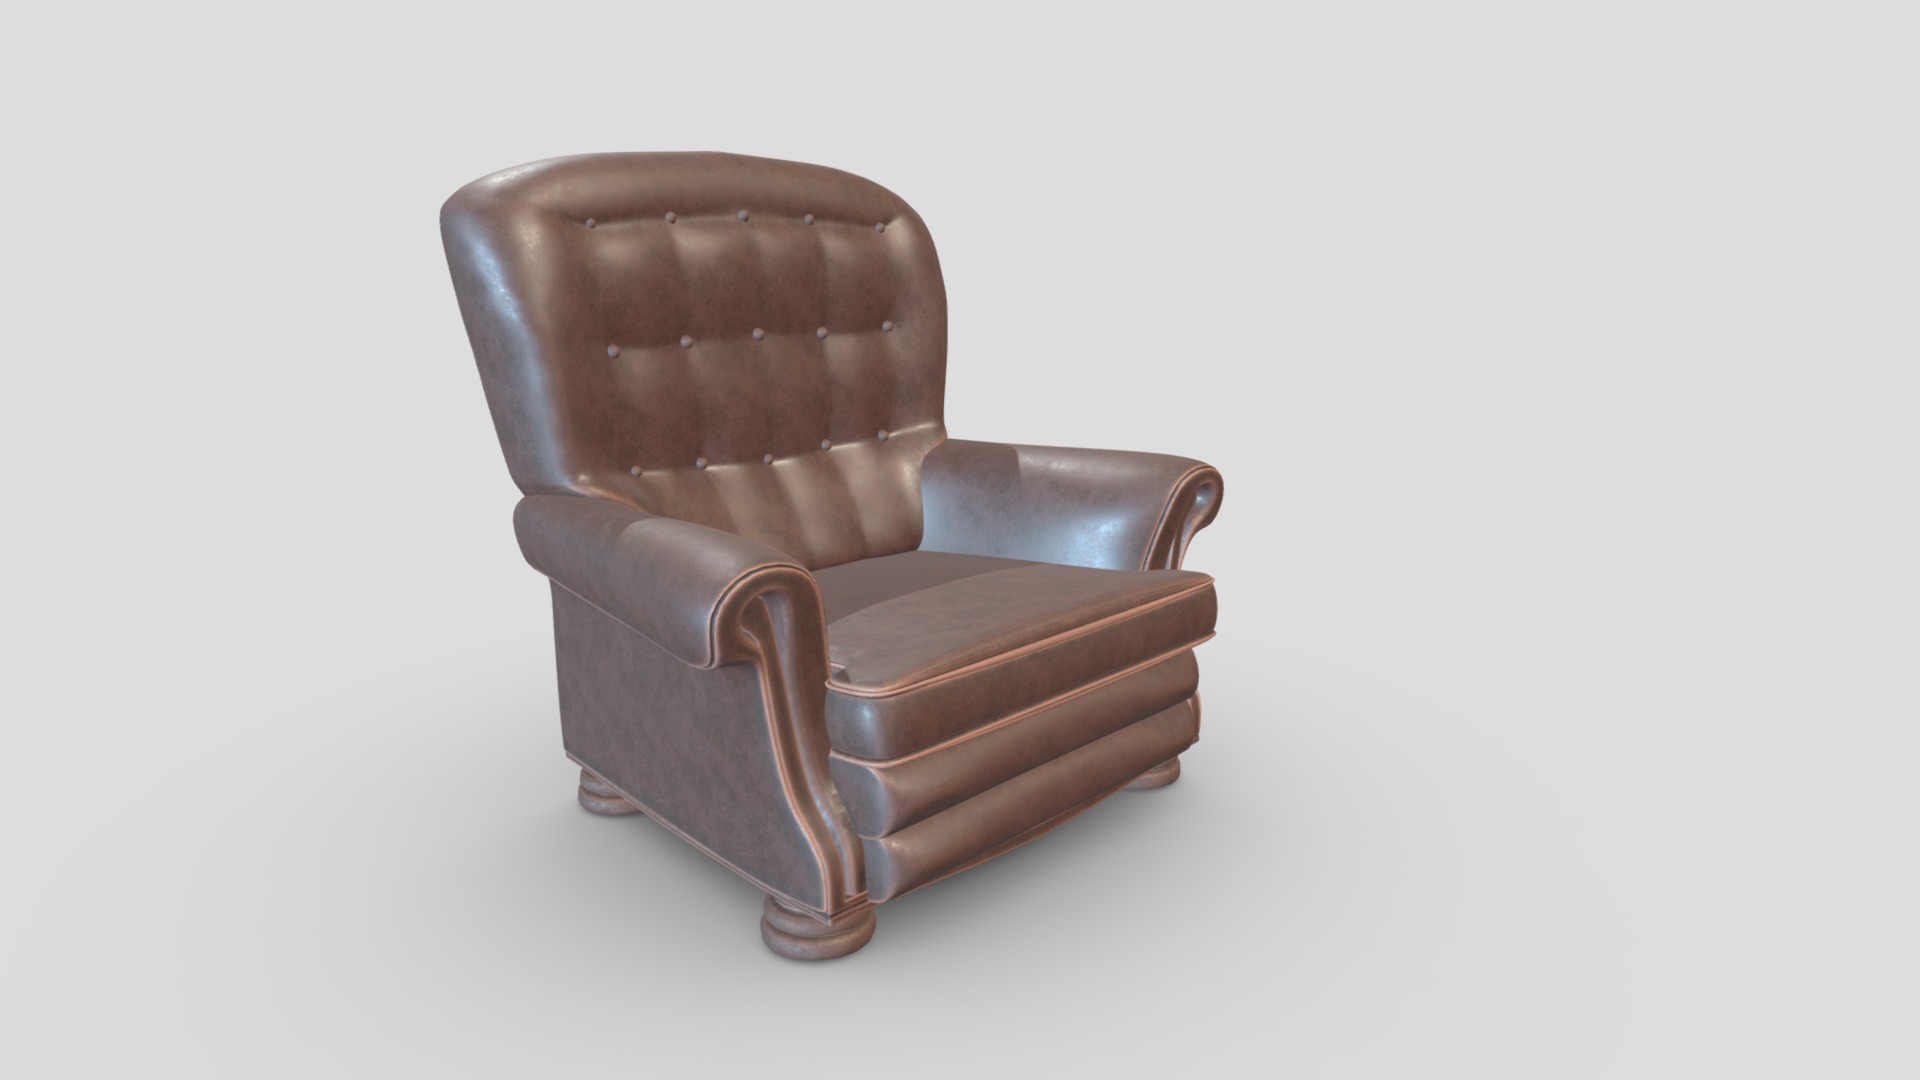 3D model Arm Chair  21 - This is a 3D model of the Arm Chair  21. The 3D model is about a brown leather chair.